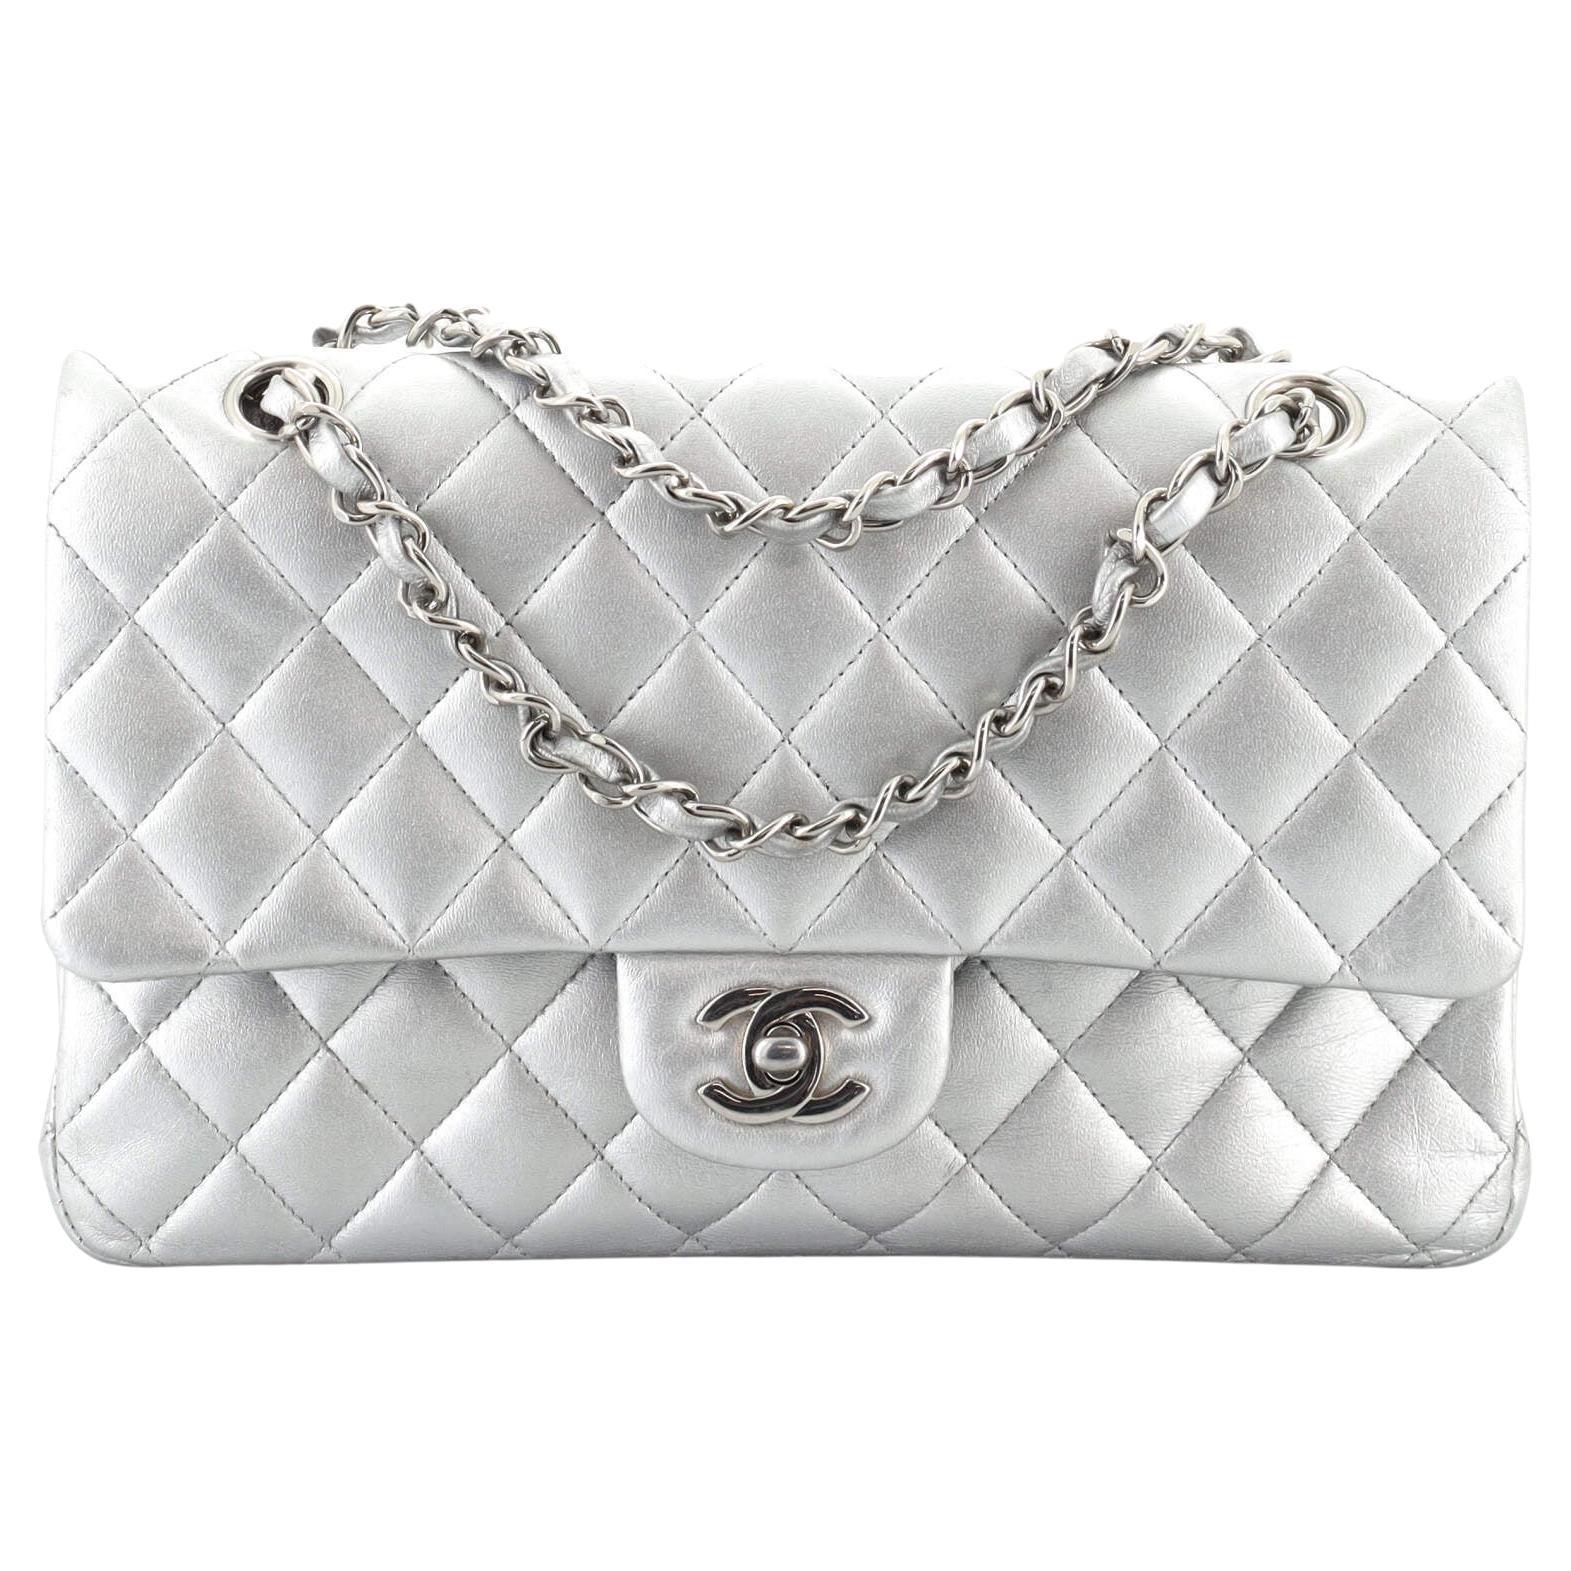 what is the cheapest chanel bag